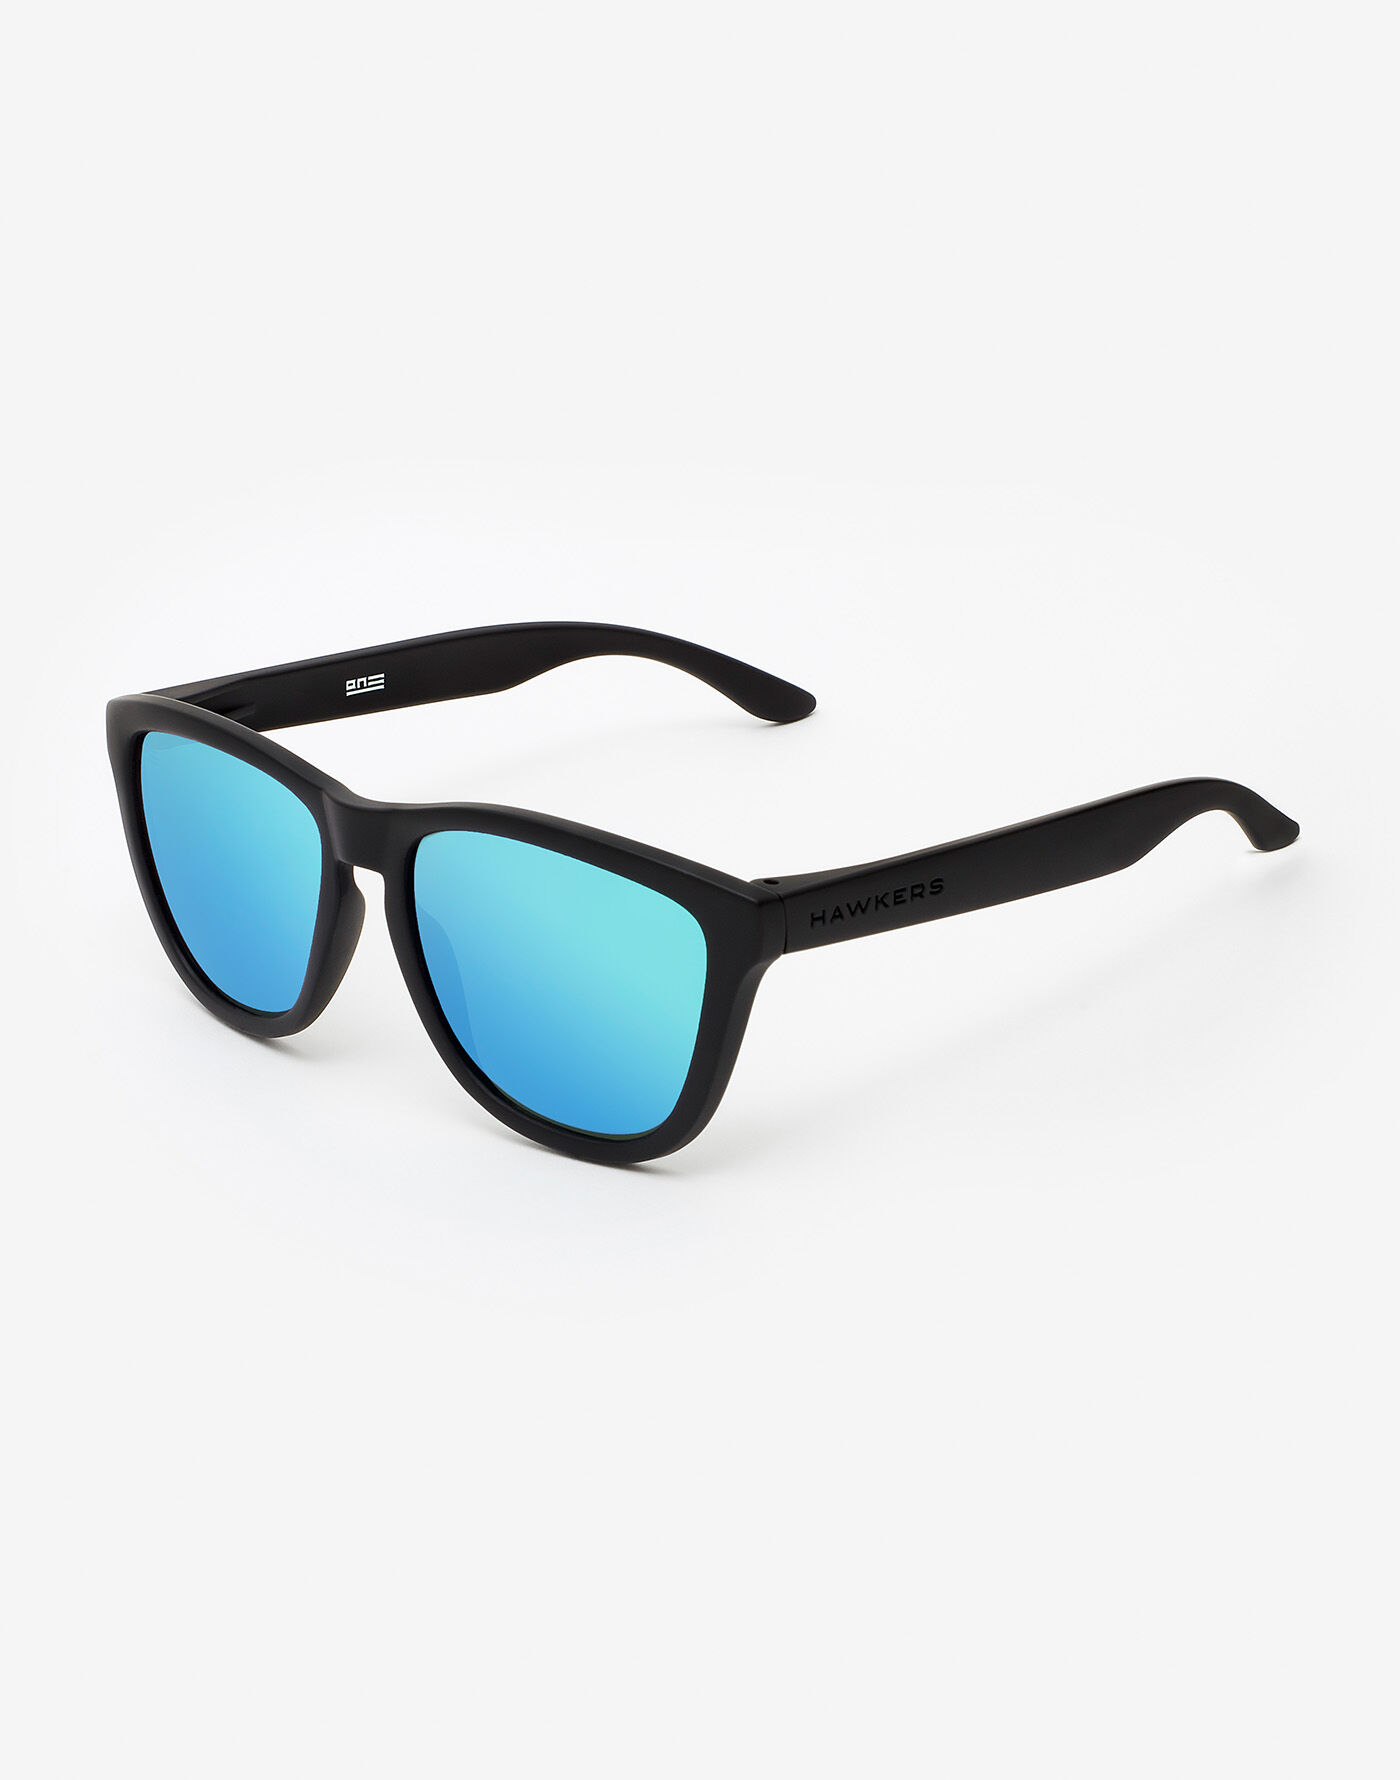 HAWKERS · POLARIZED ONE Sunglasses for Men and Women. 